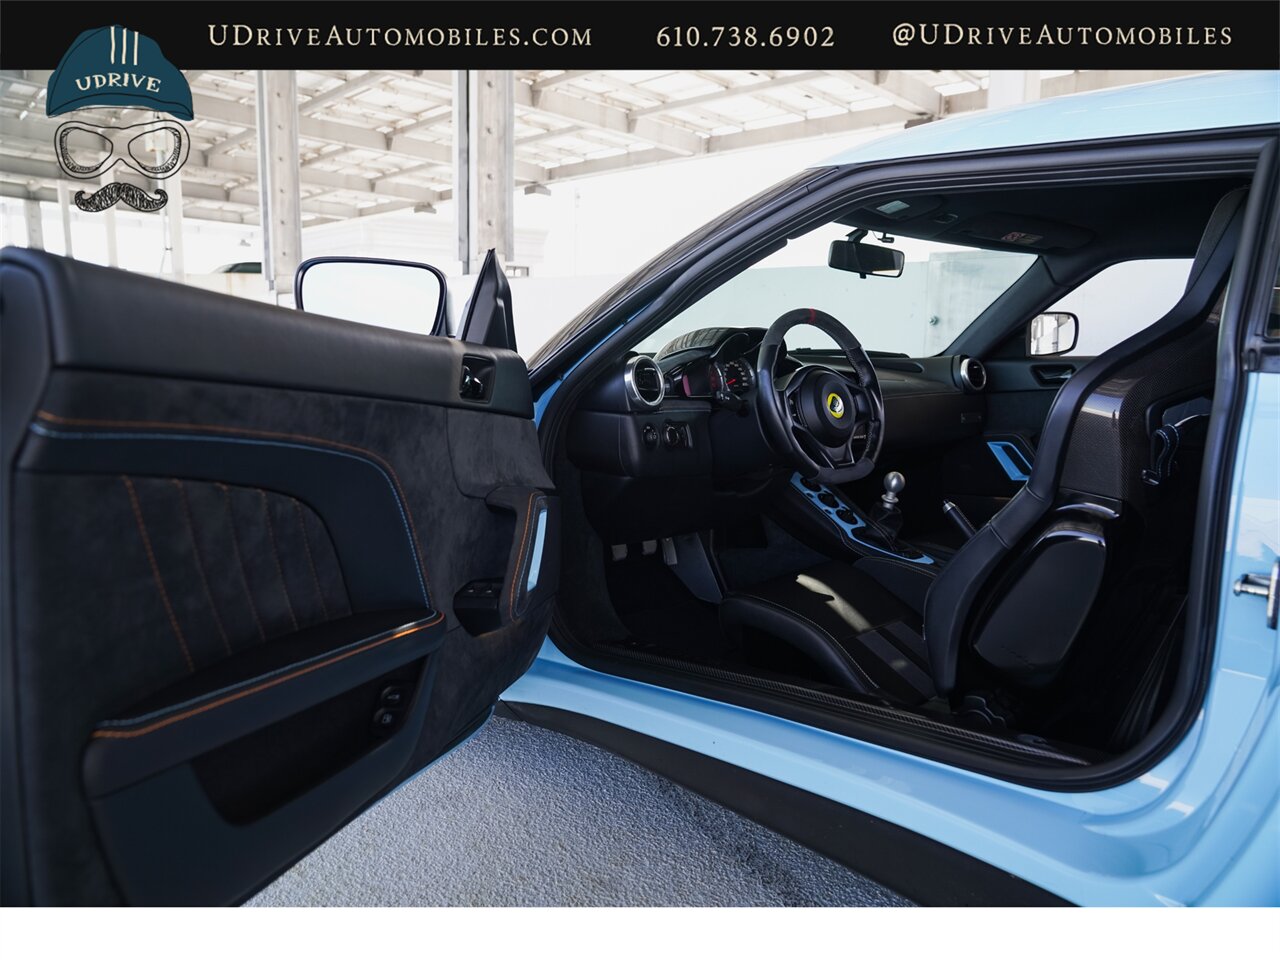 2020 Lotus Evora GT 2+2  6 Speed Manual Sky Blue Bespoke Stitching - Photo 28 - West Chester, PA 19382